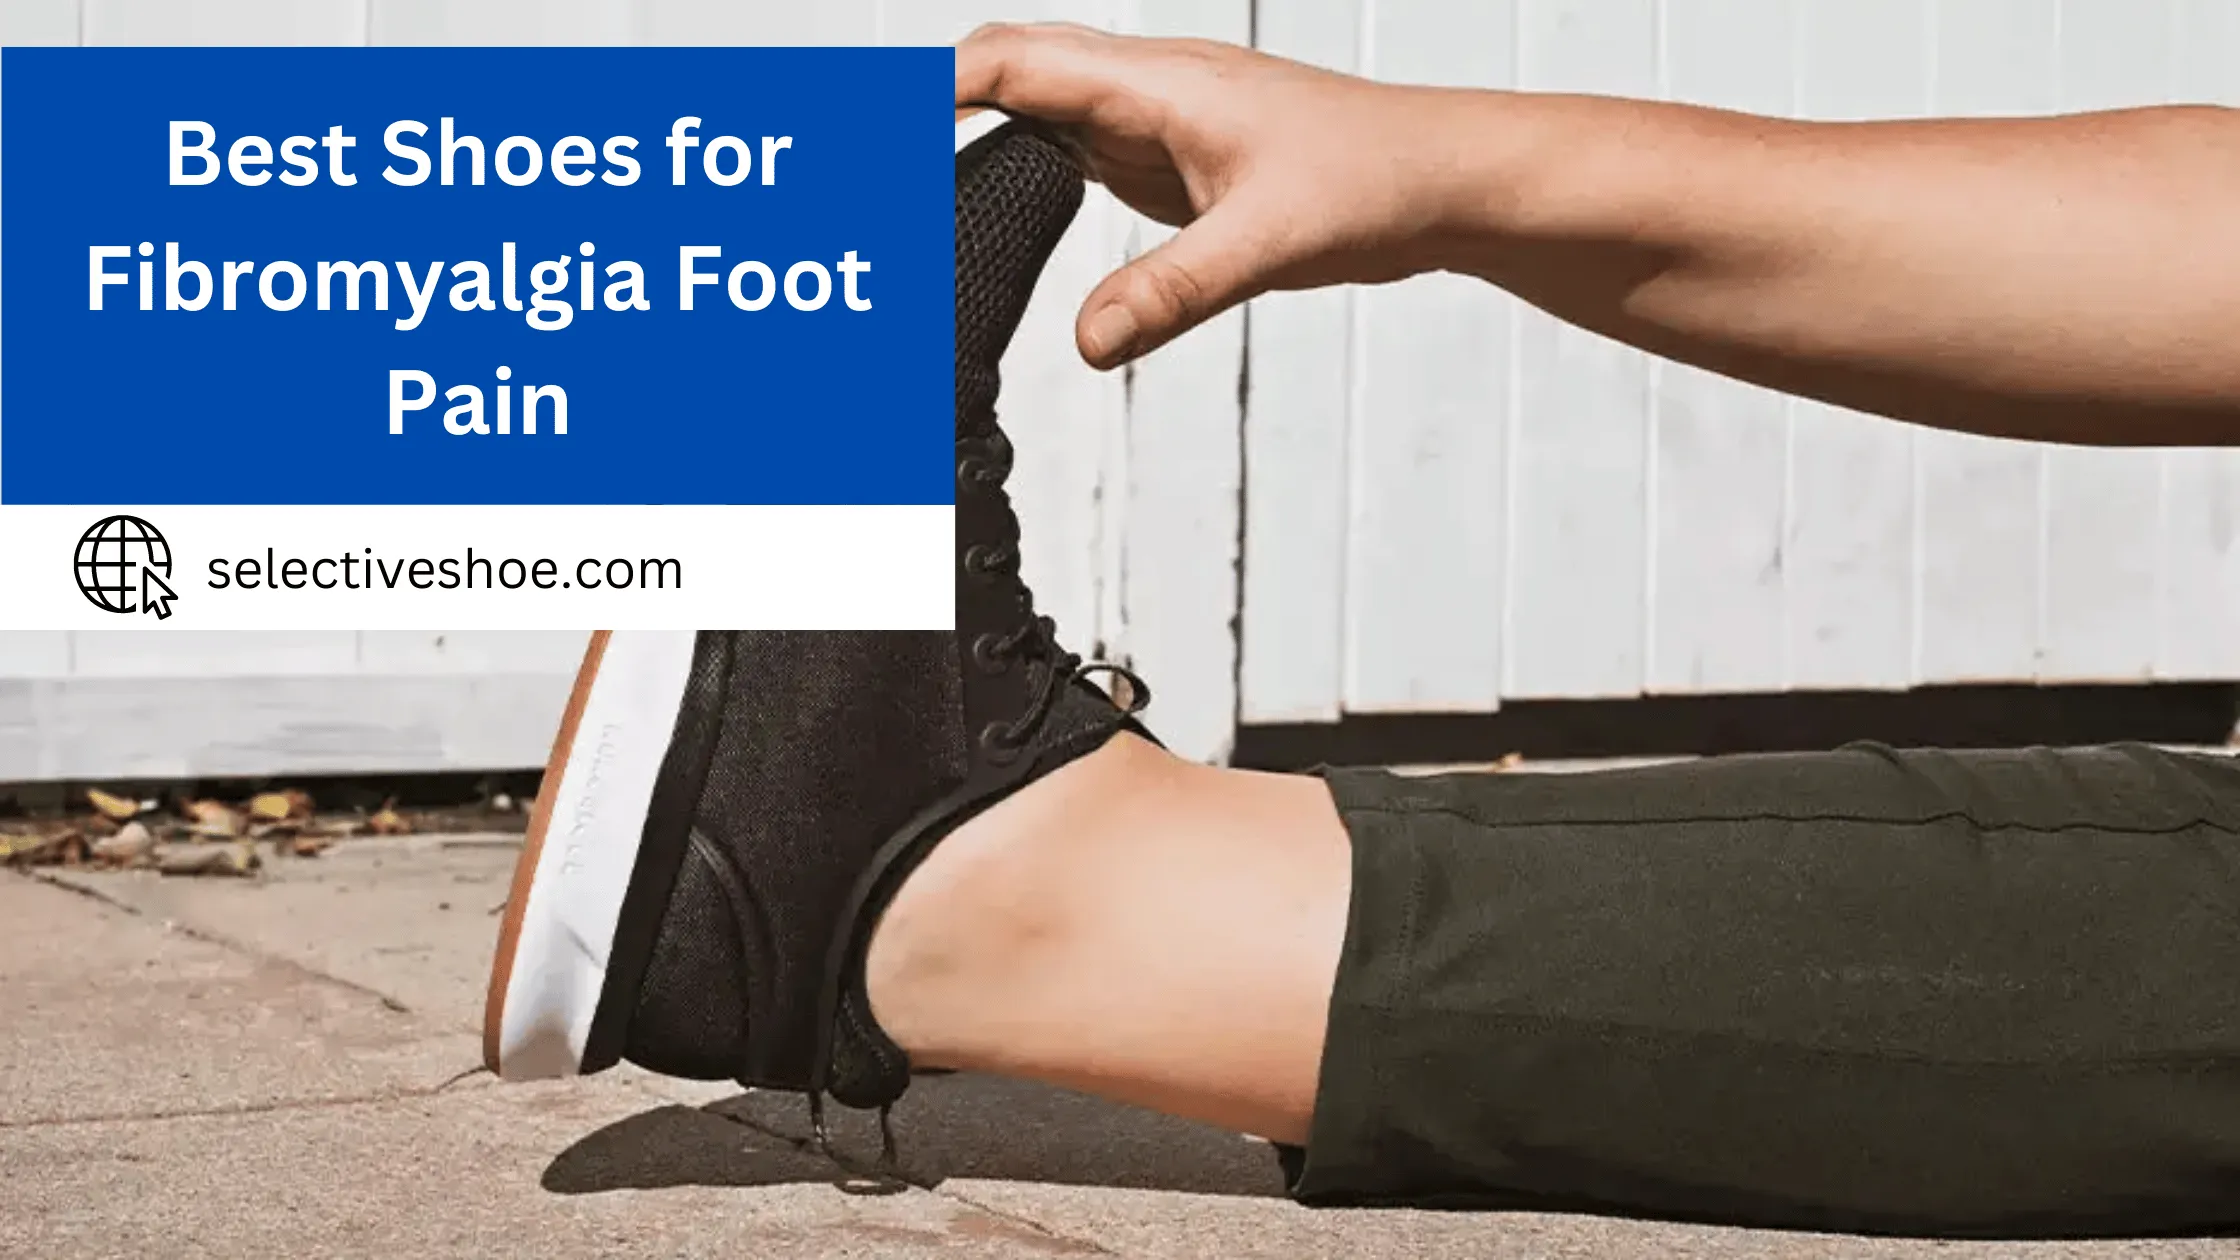 Best Shoes For Fibromyalgia Foot Pain - A Comprehensive Guide